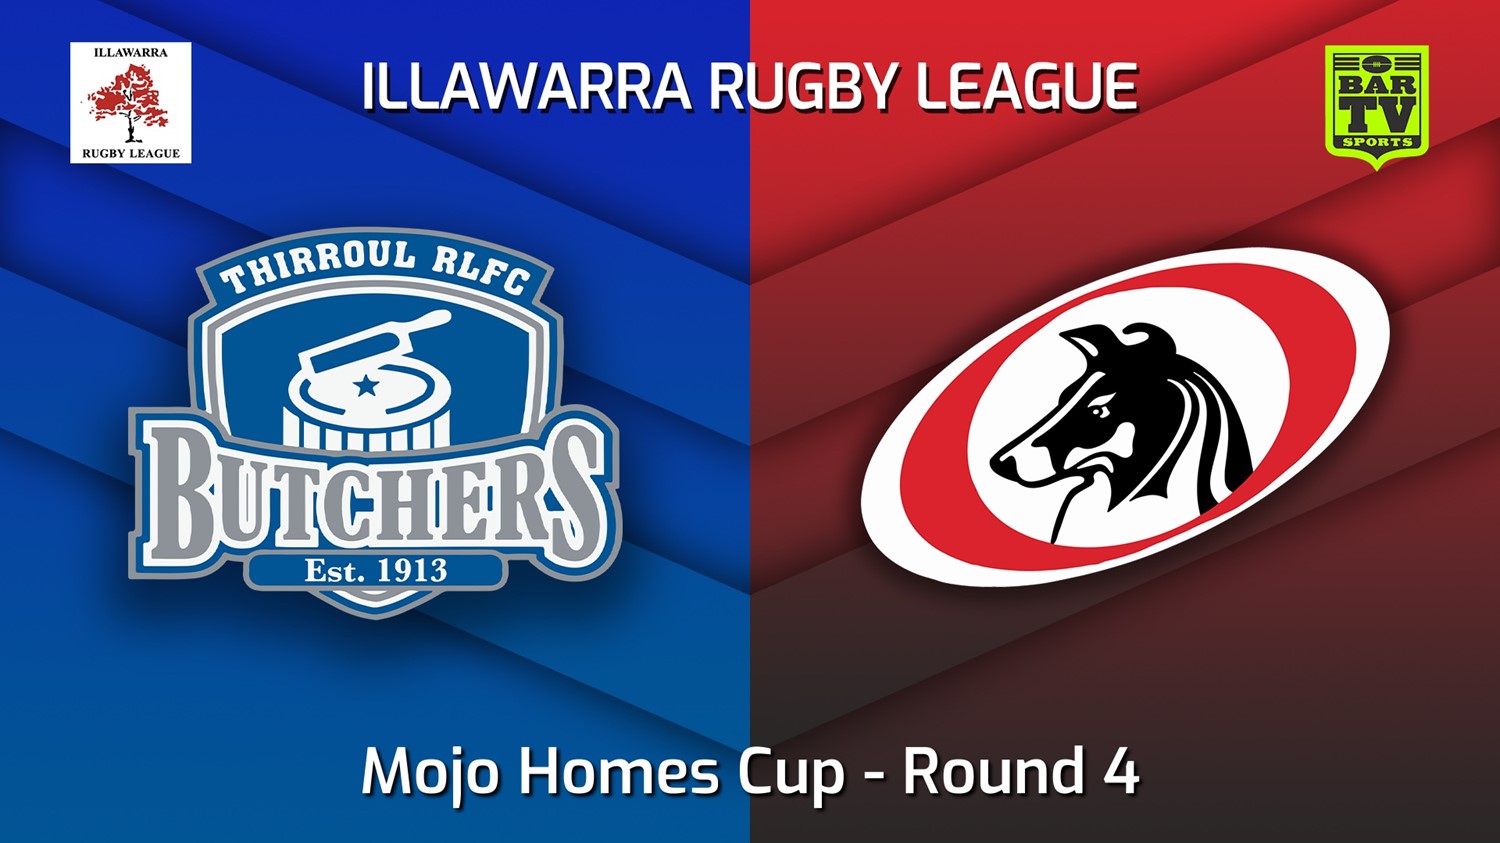 220521-Illawarra Round 4 - Mojo Homes Cup - Thirroul Butchers v Collegians Slate Image